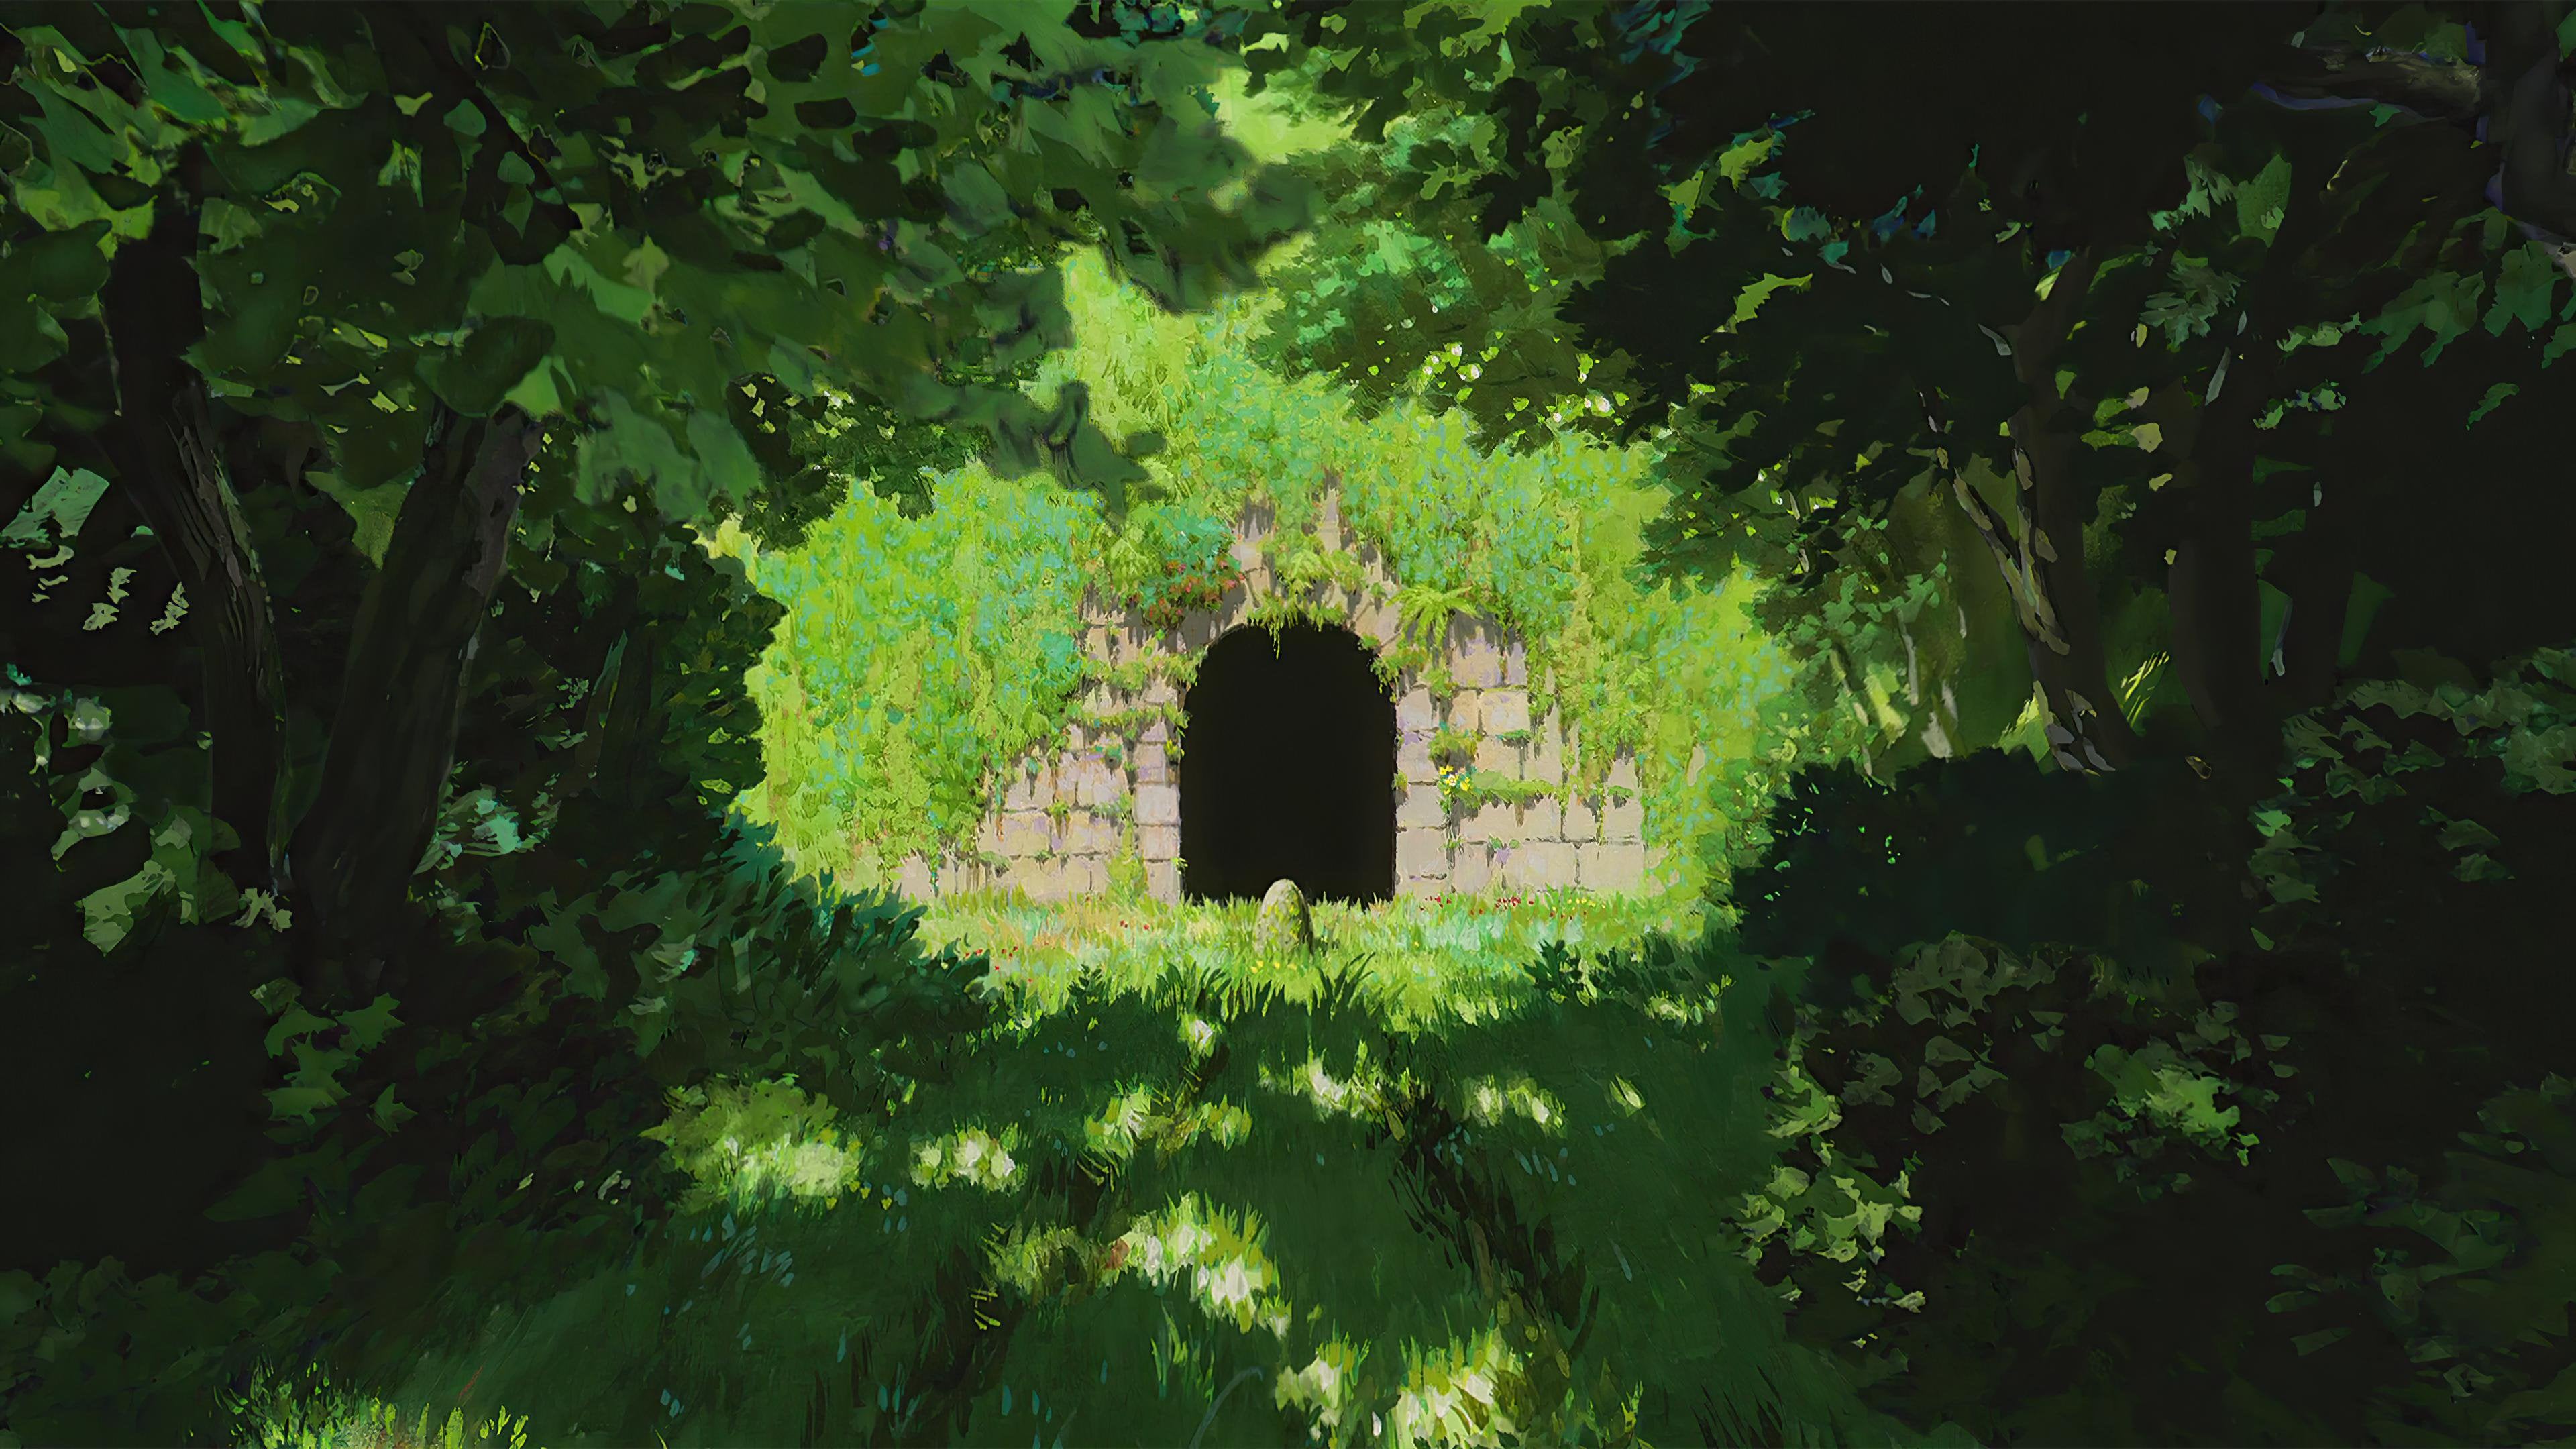 Ghibli Upscaled Wallpaper Collection Of U Weenbell's Screencaptures Upscaled! Full Uncompressed Google Drive Link In Comments With Wallpaper [mostly 1920x1080 Scaled To Mostly 3840x All Outputs At Least 4K]